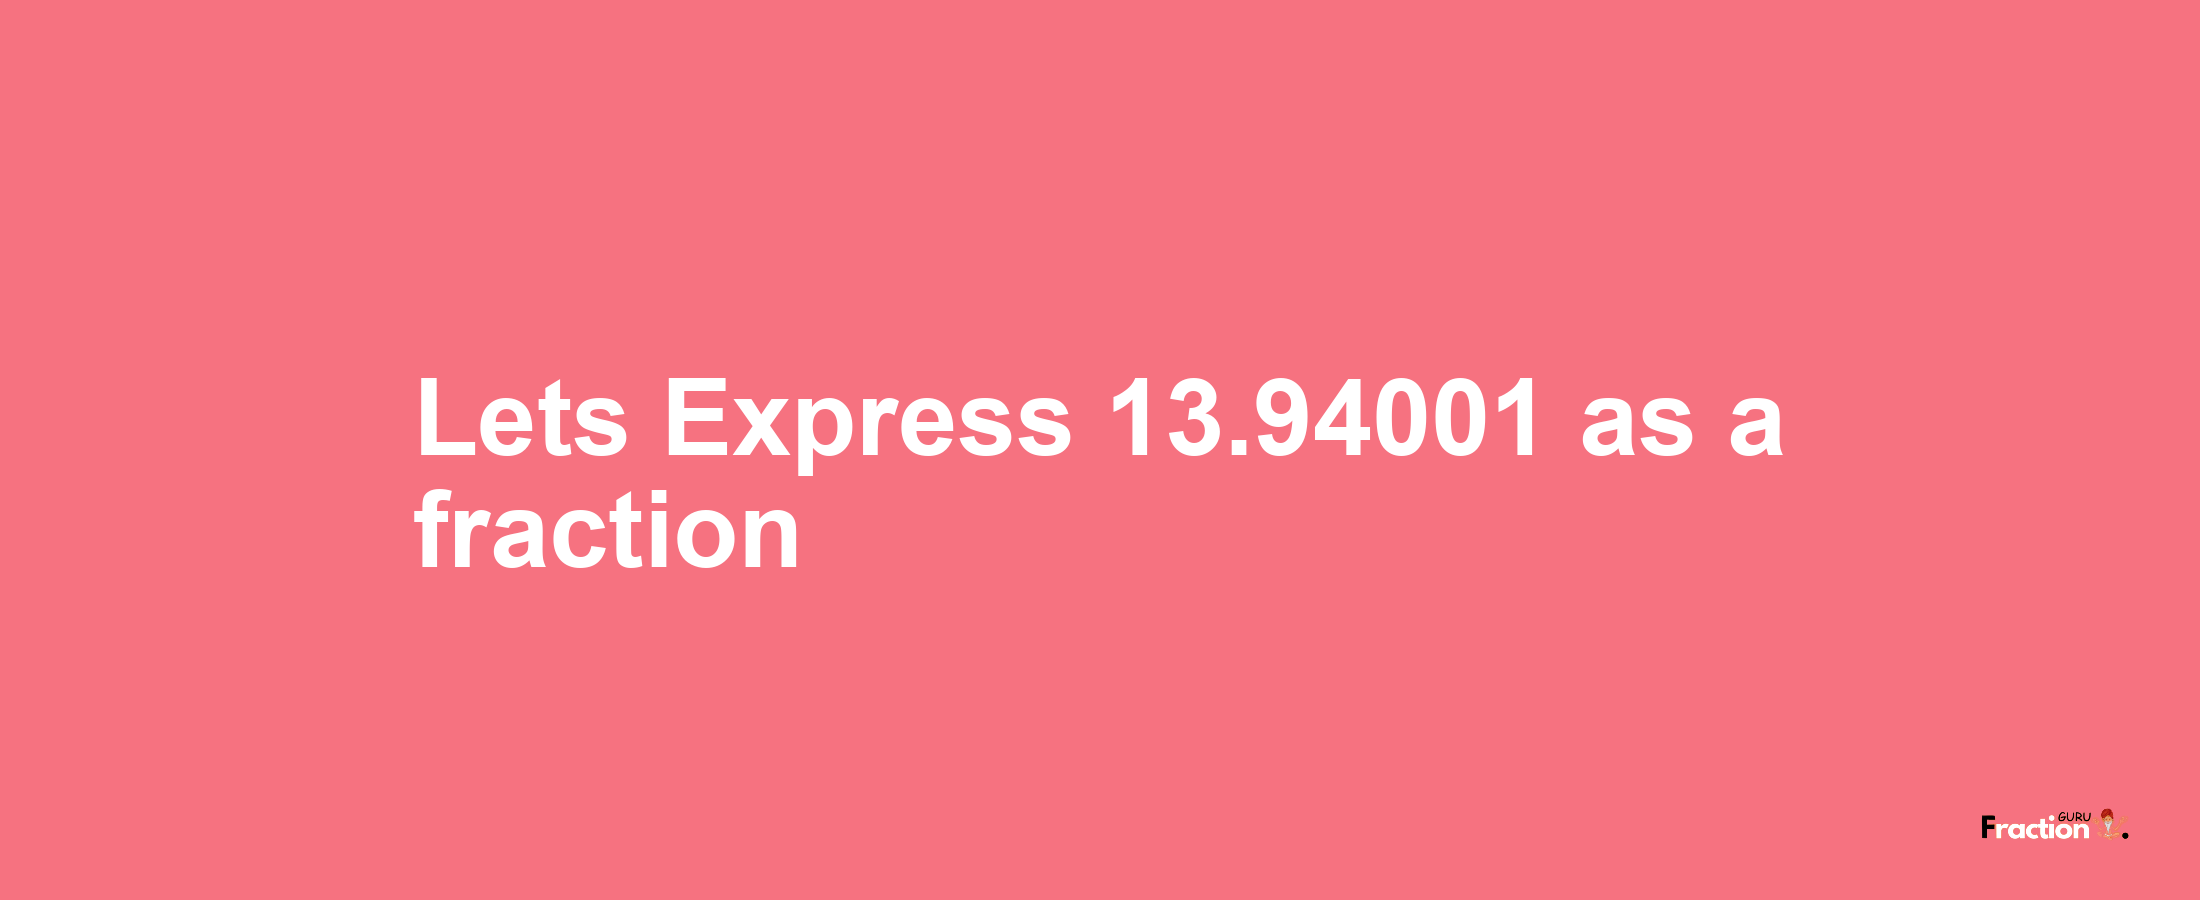 Lets Express 13.94001 as afraction